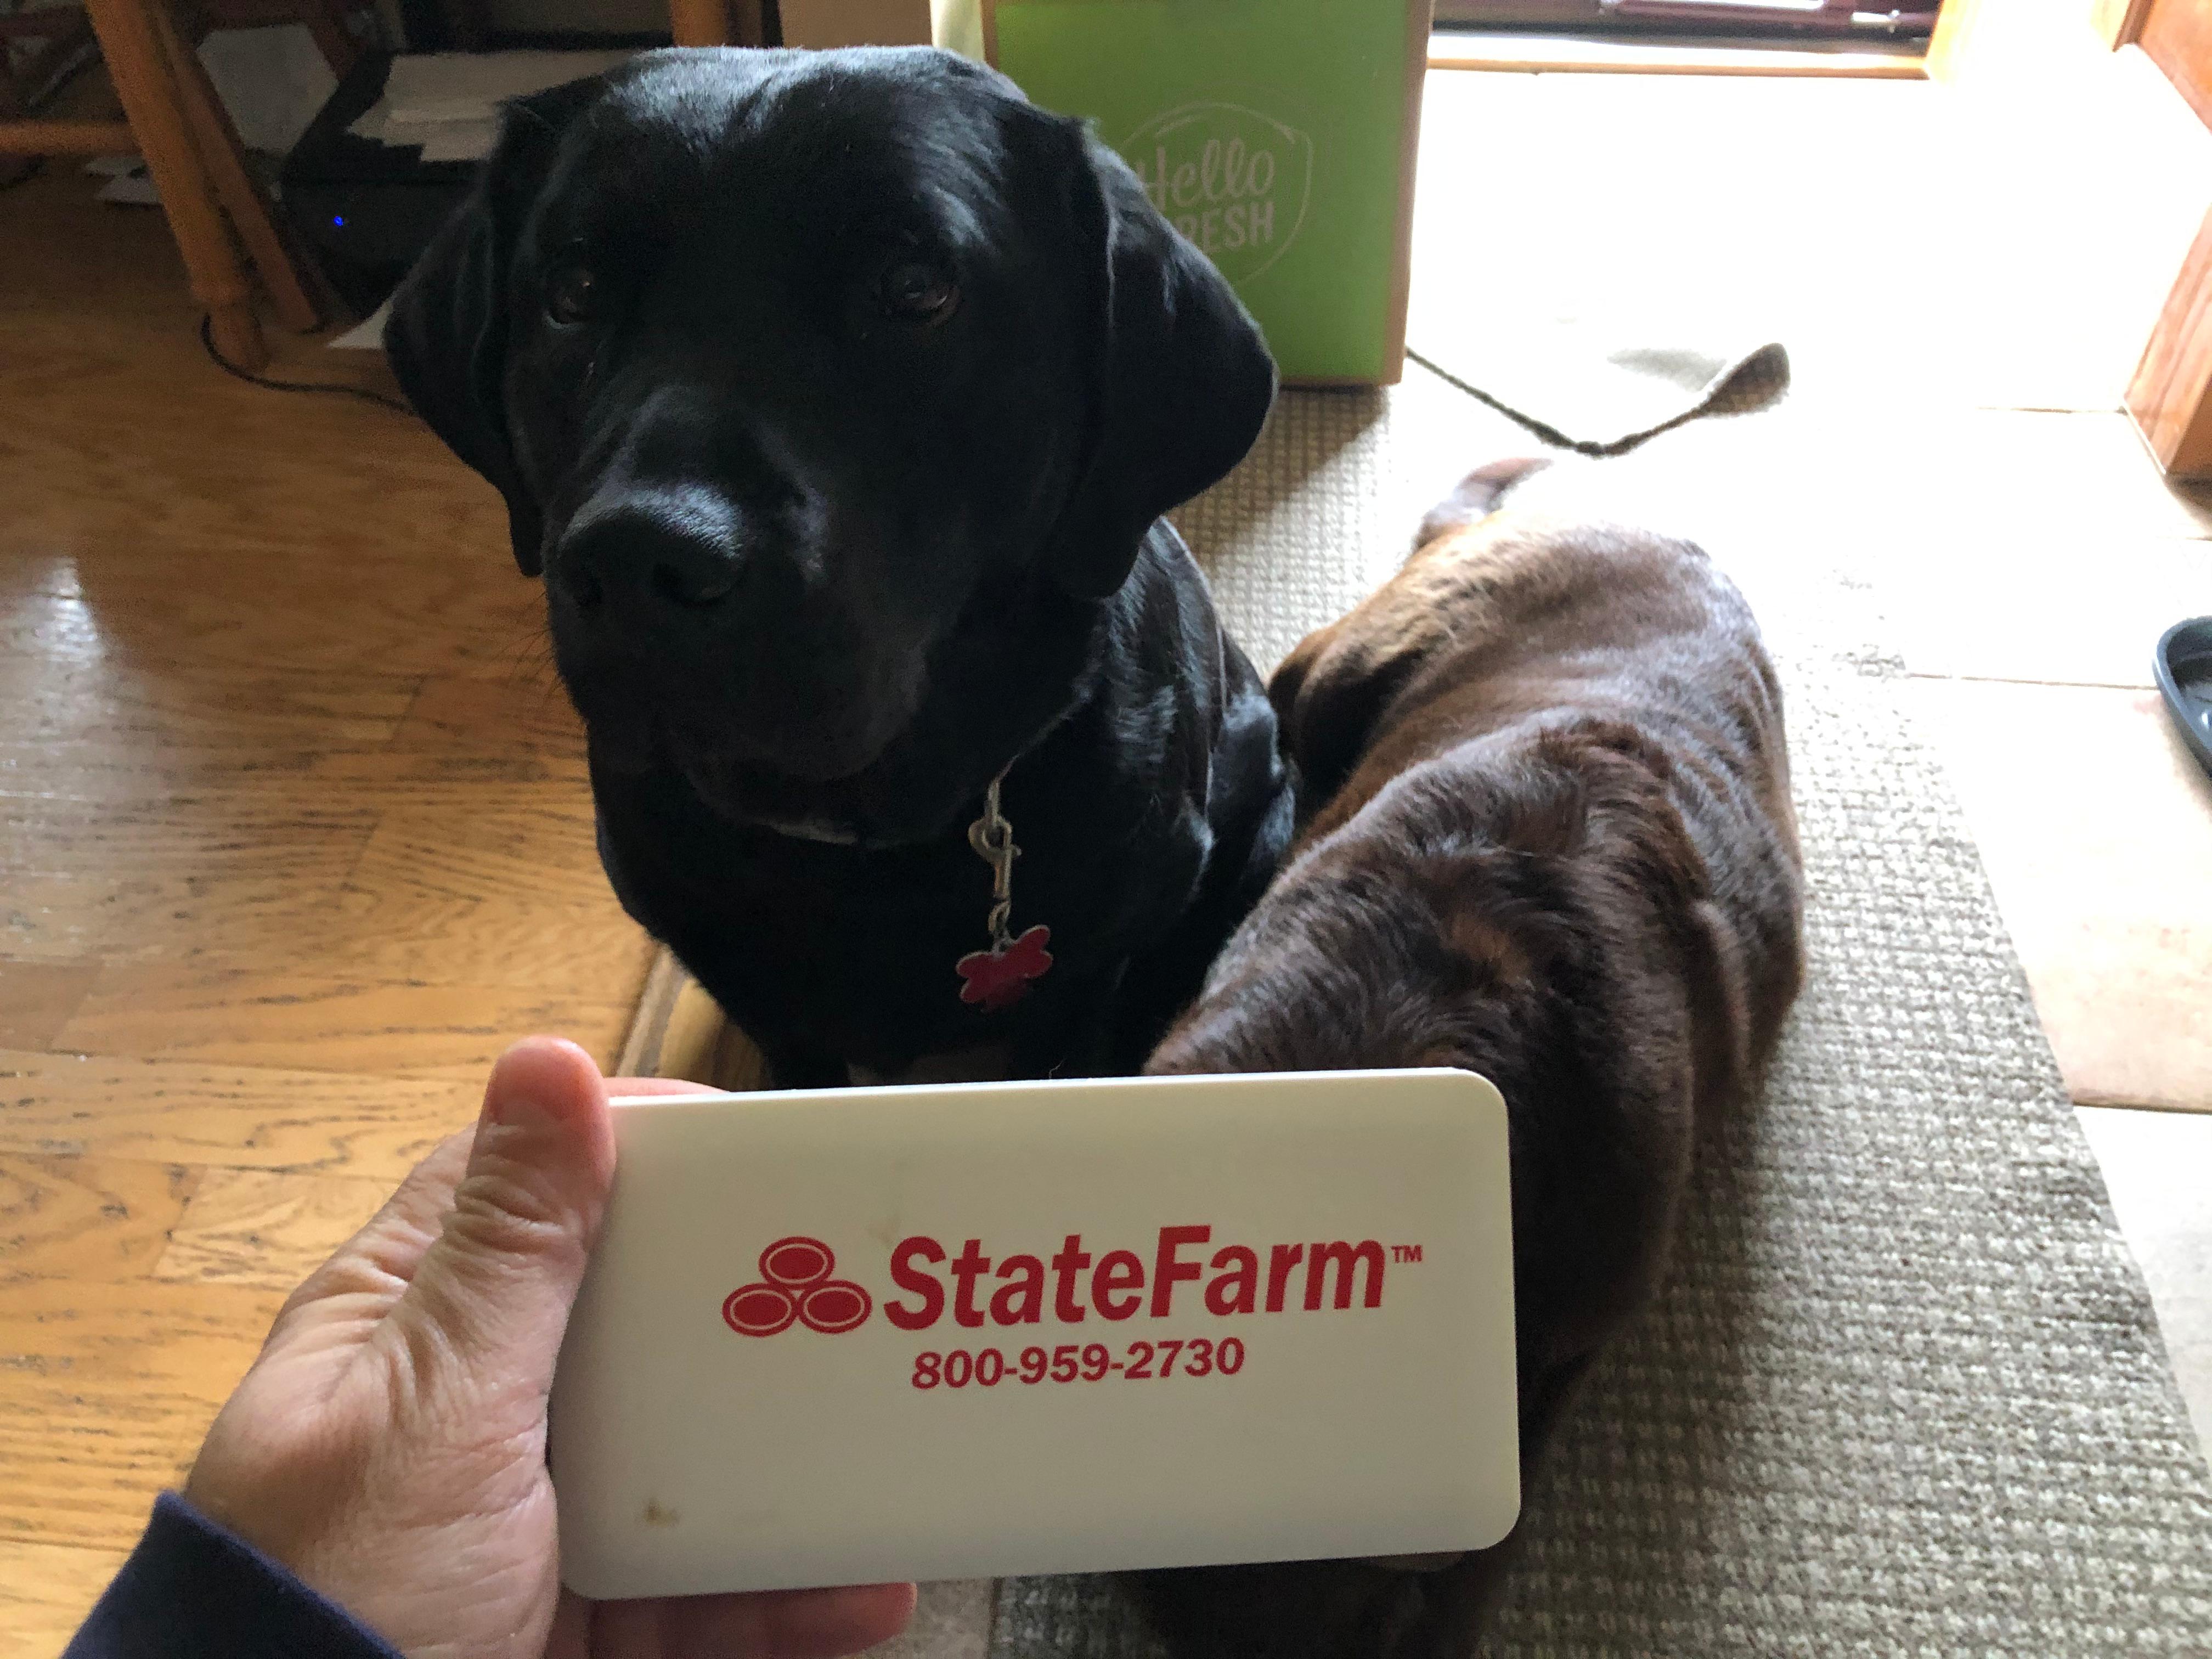 State Farm pups smiling with their State Farm treat